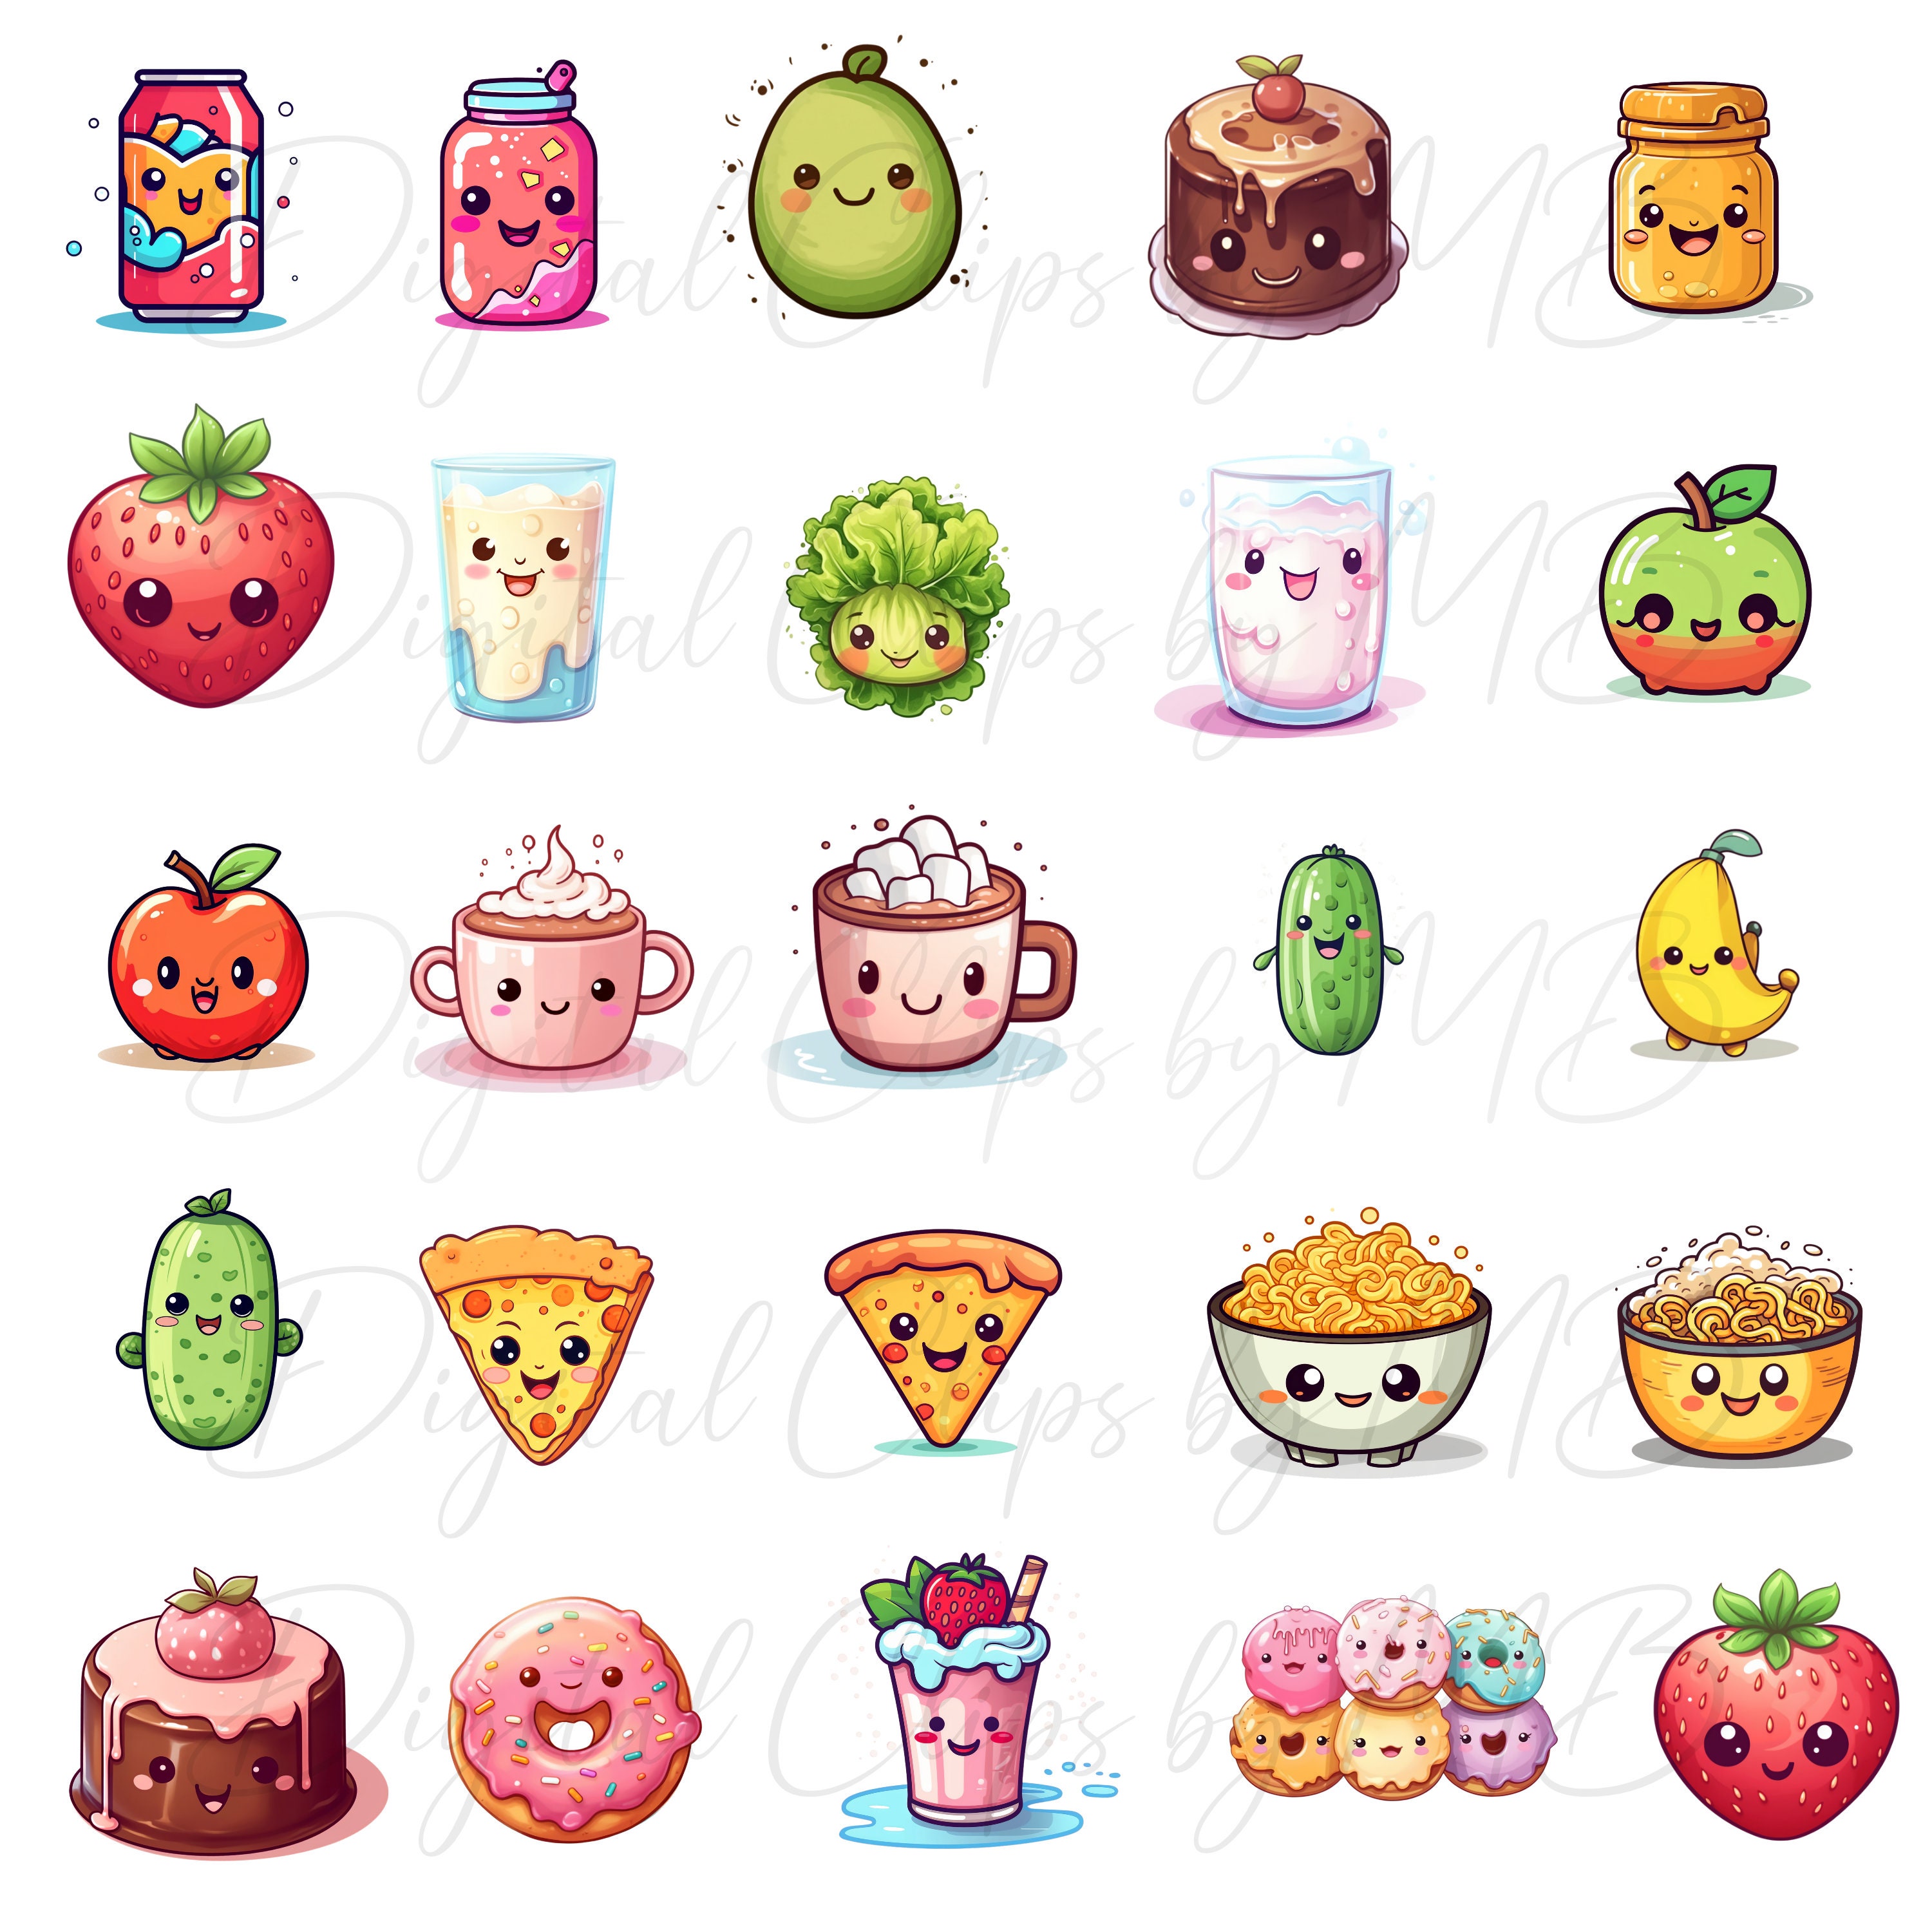 Kawaii Stickers Clipart Kawaii Food Clipart for Stickers - Etsy